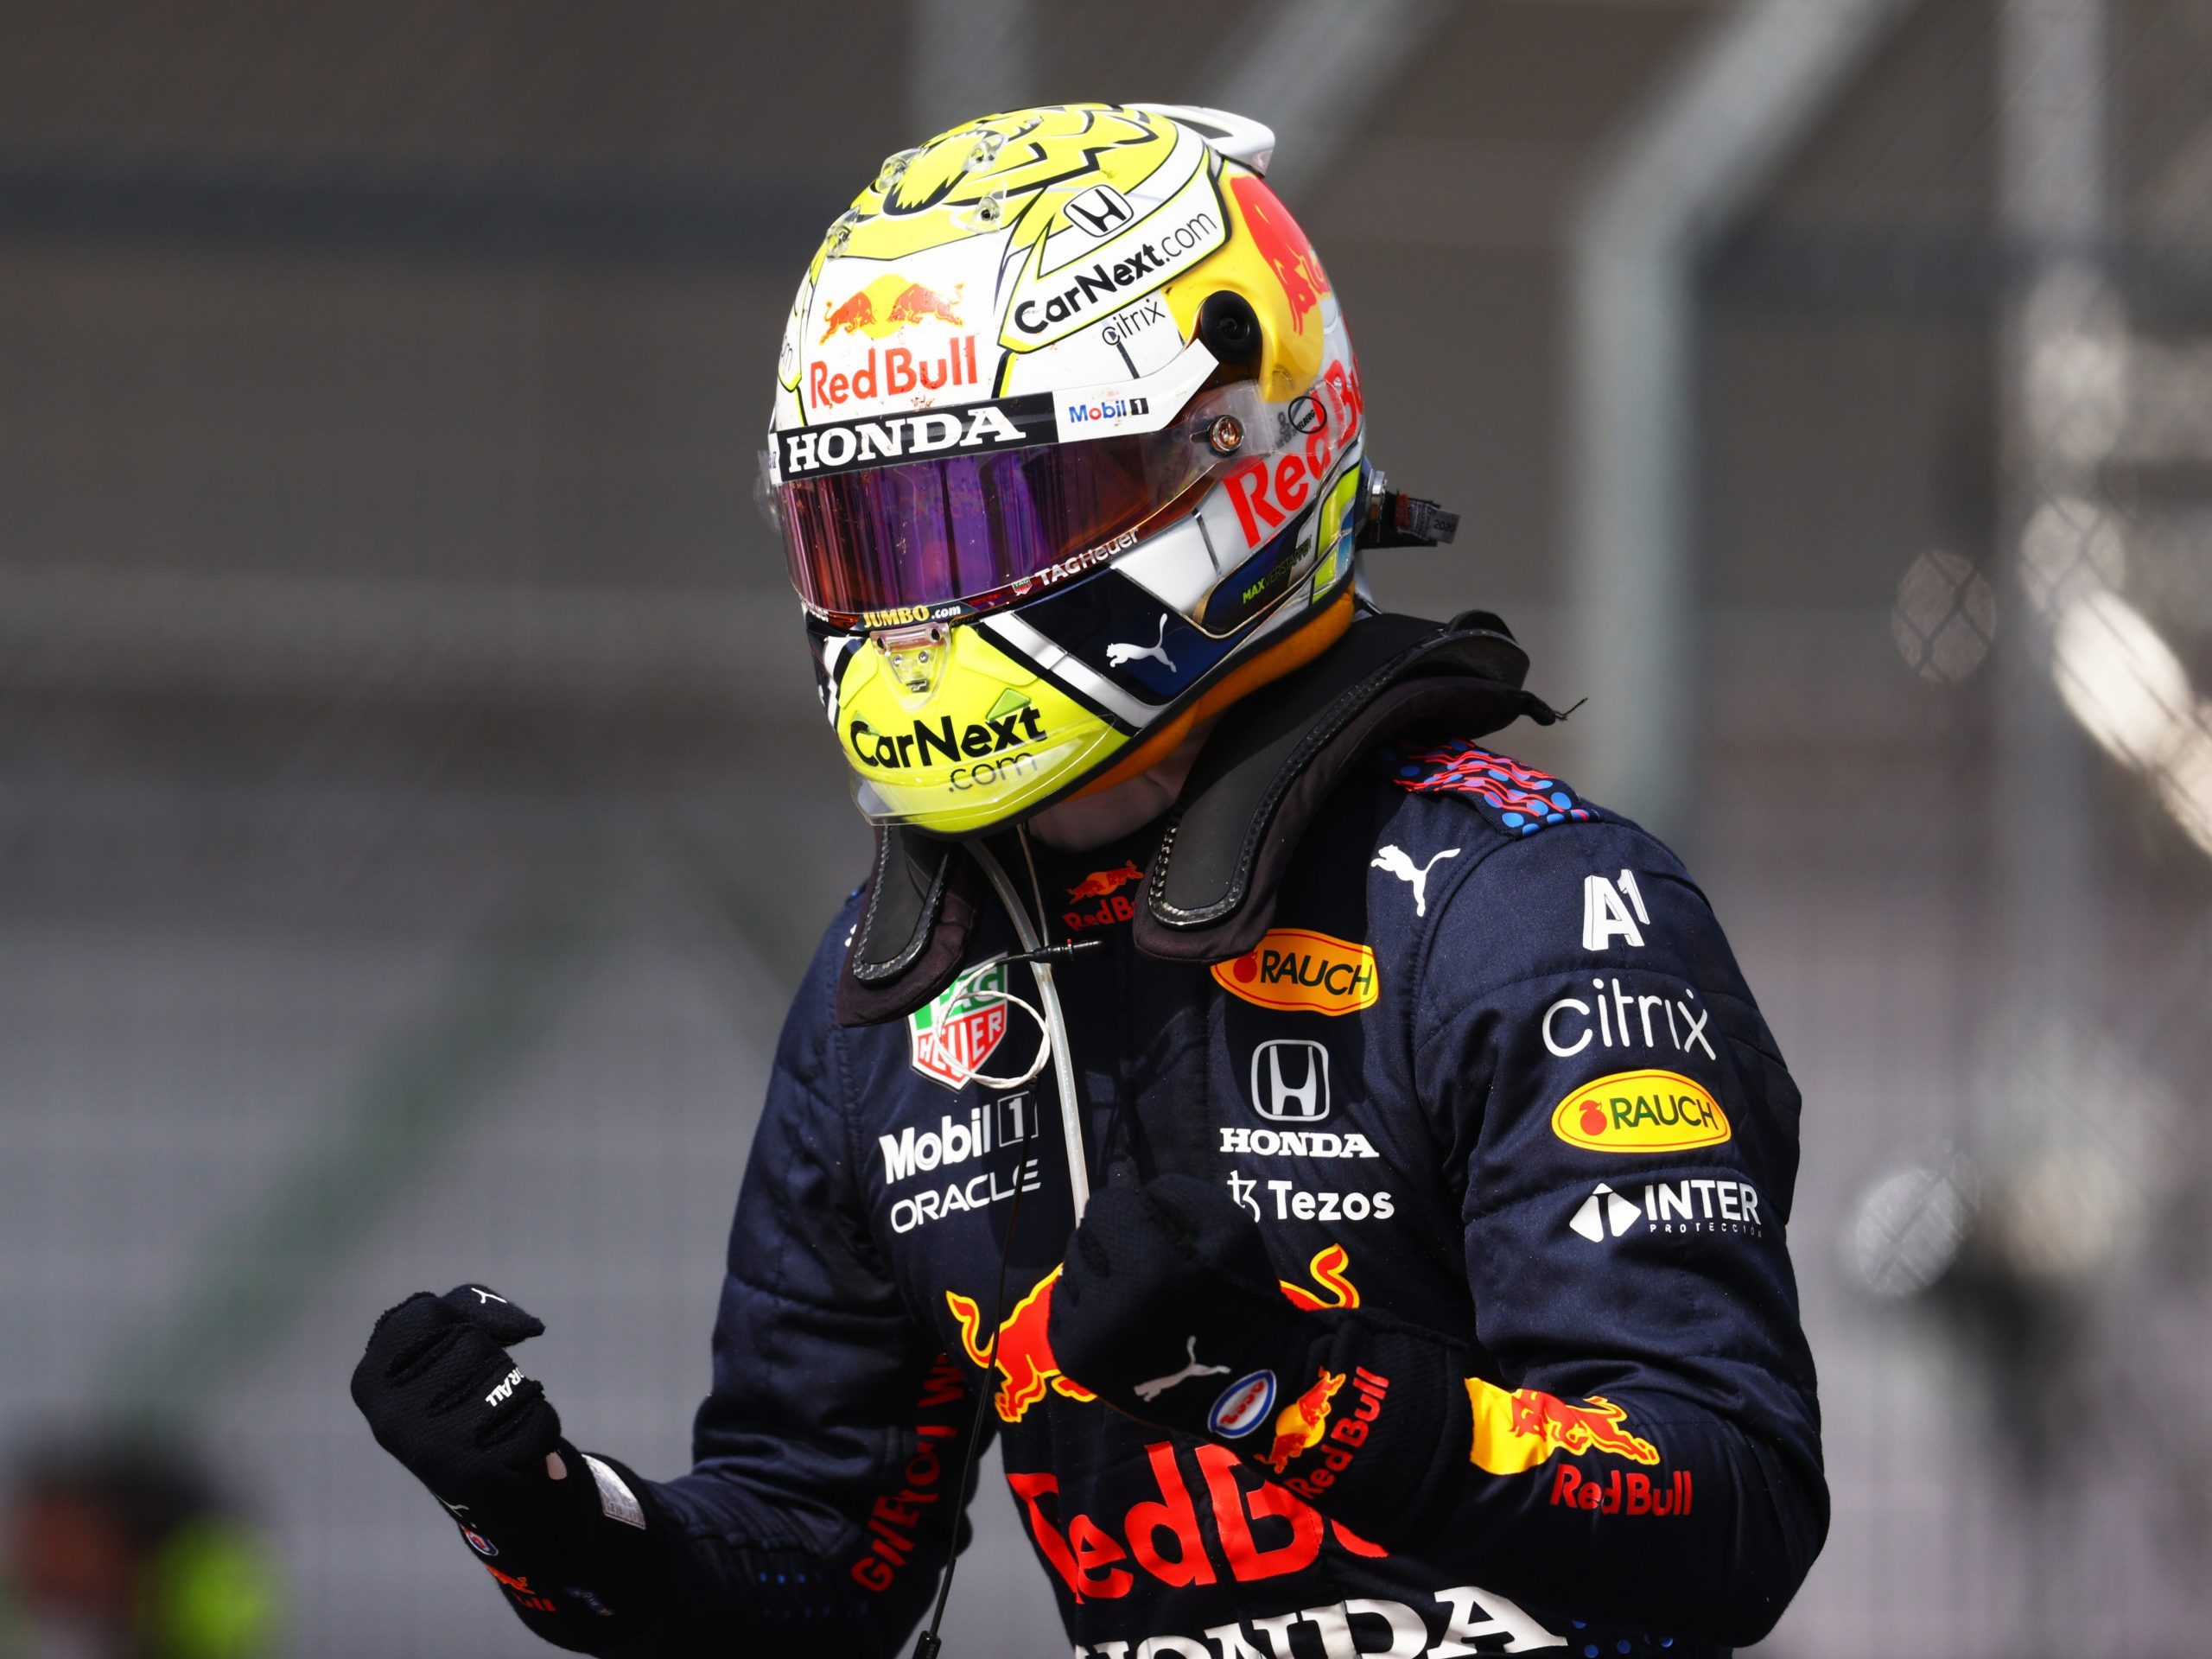 Red Bull's Max Verstappen celebrates after victory at the Austrian Grand Prix.